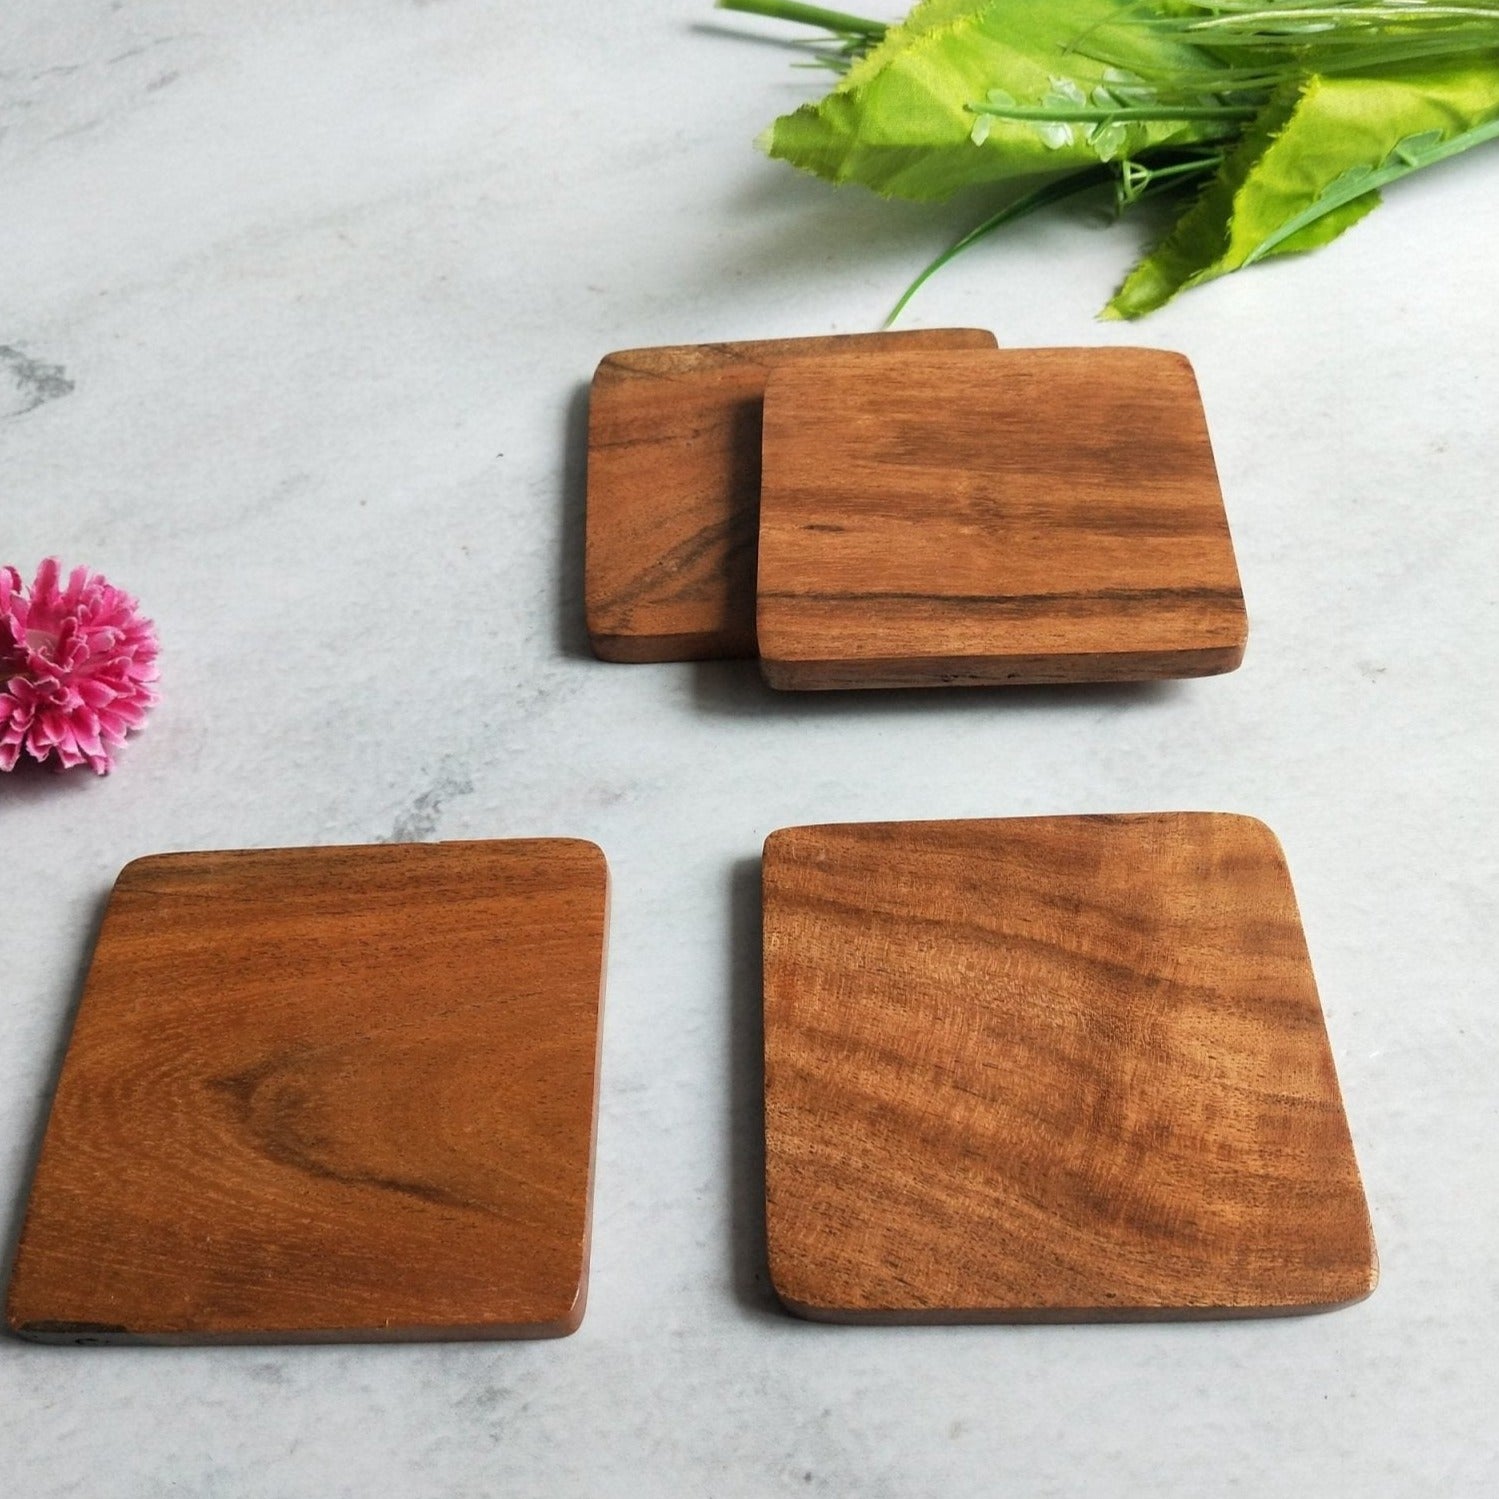 Wooden Squared Shaped Coasters Set of 4 - Nurture India